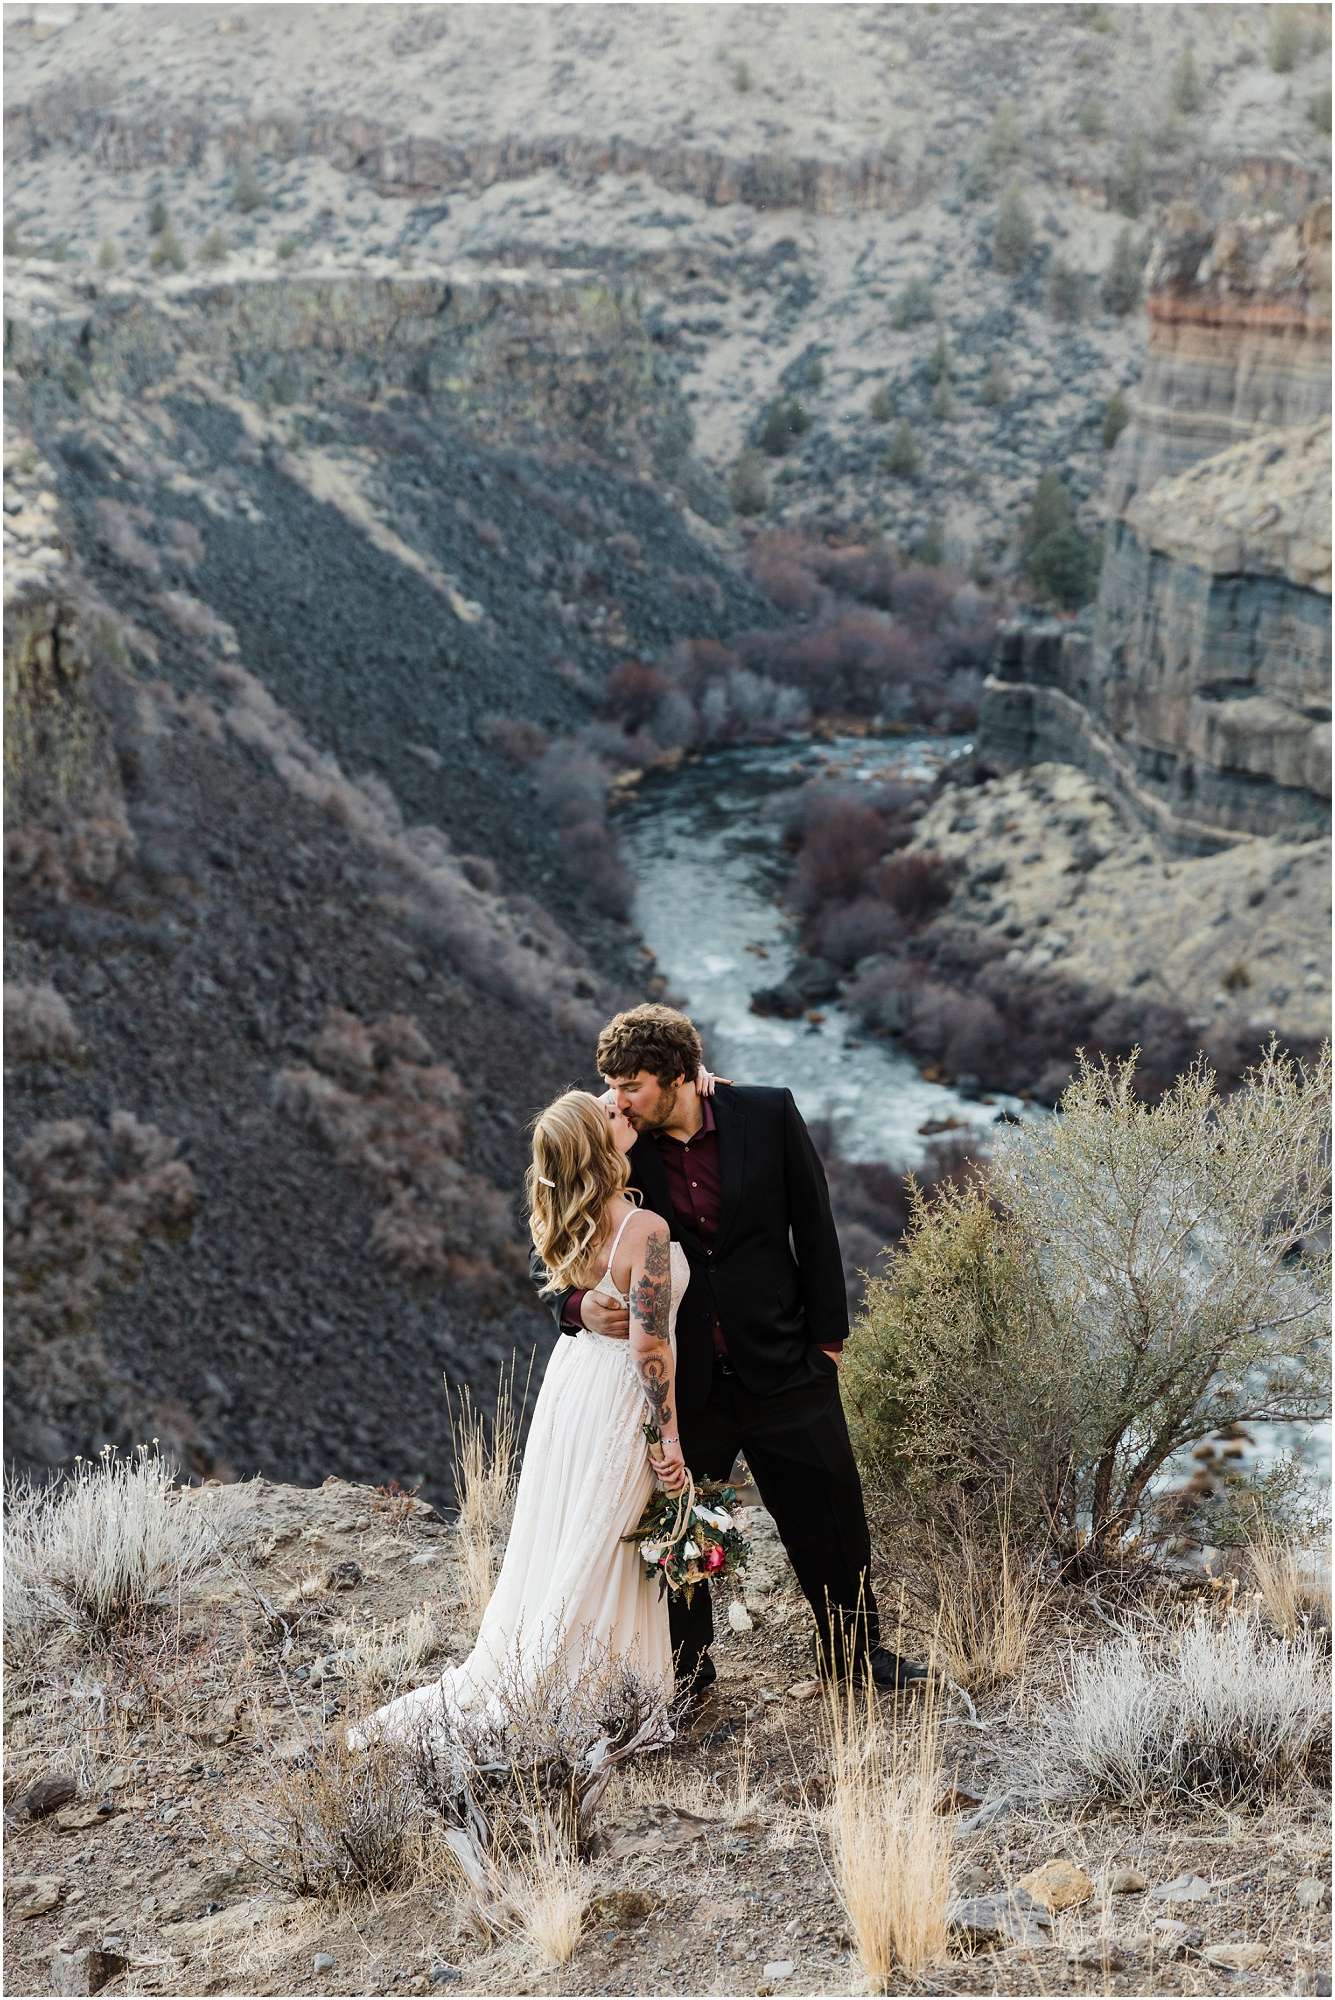 A tattooed boho bride, wearing a lace dress, kisses her groom in black and burgundy overlooking the Deschutes River for an amazing adventure elopement near Bend Oregon. | Erica Swantek Photography